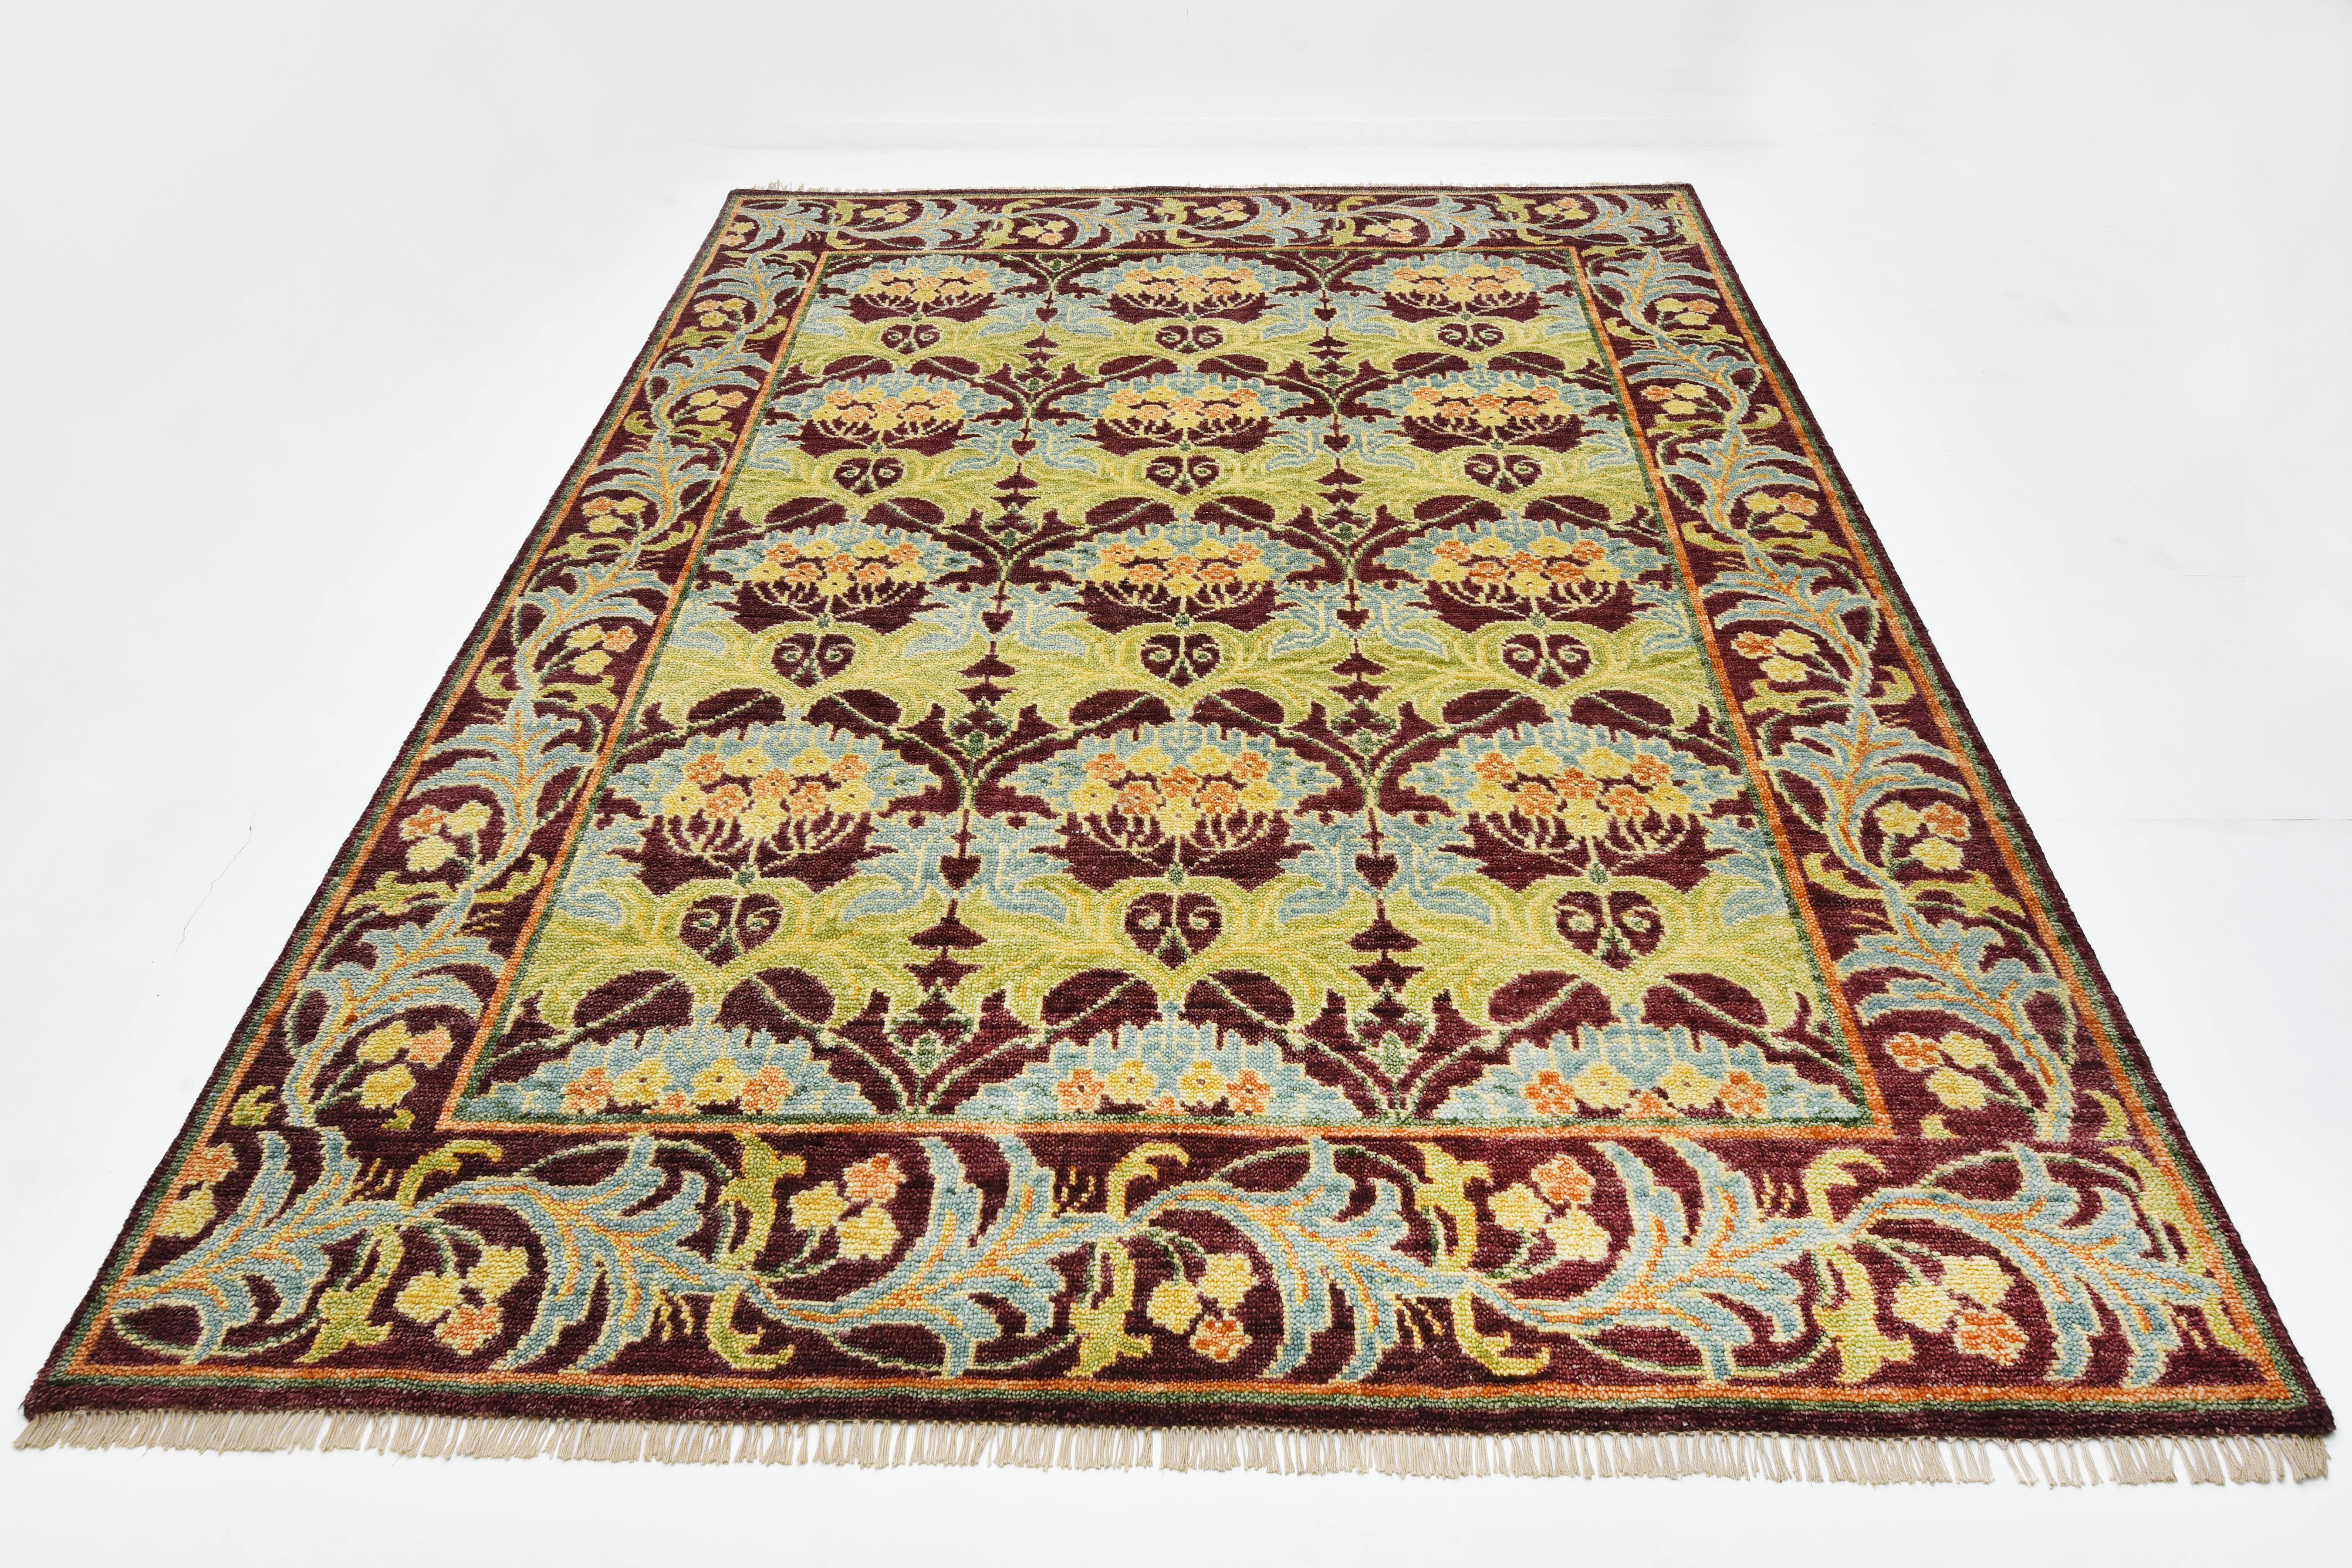 Hand-knotted, wool pile on a cotton foundation.

8' x 10'

New

Origin: India

Field Color: Burgundy

Border Color: Burgundy

Accent Color: Ivory, Blue, Green, Gold, Burnt-Orange.